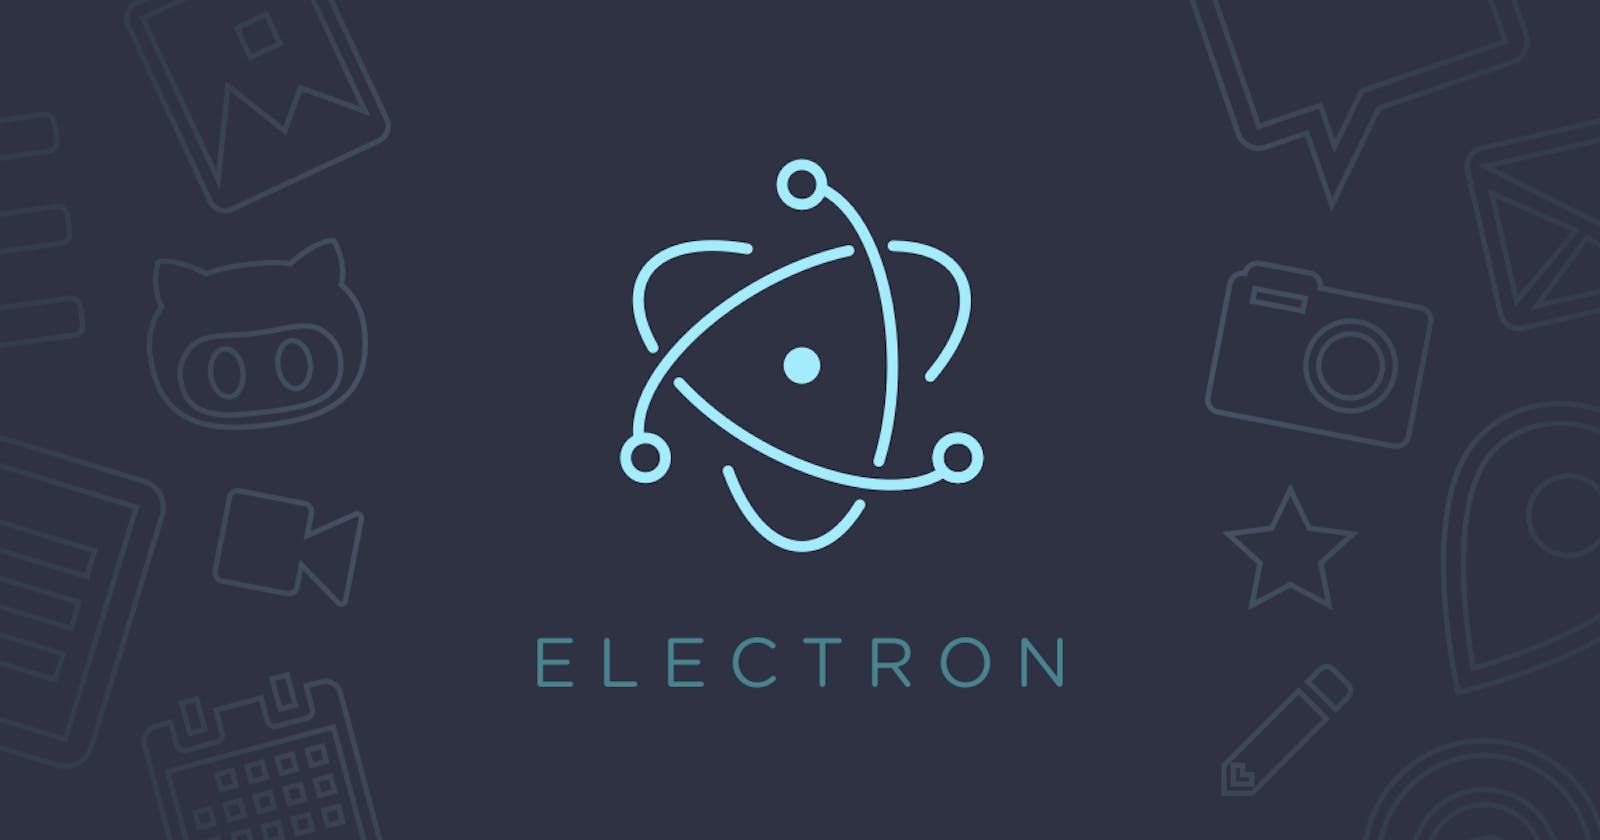 How To Build Your First App With Electron